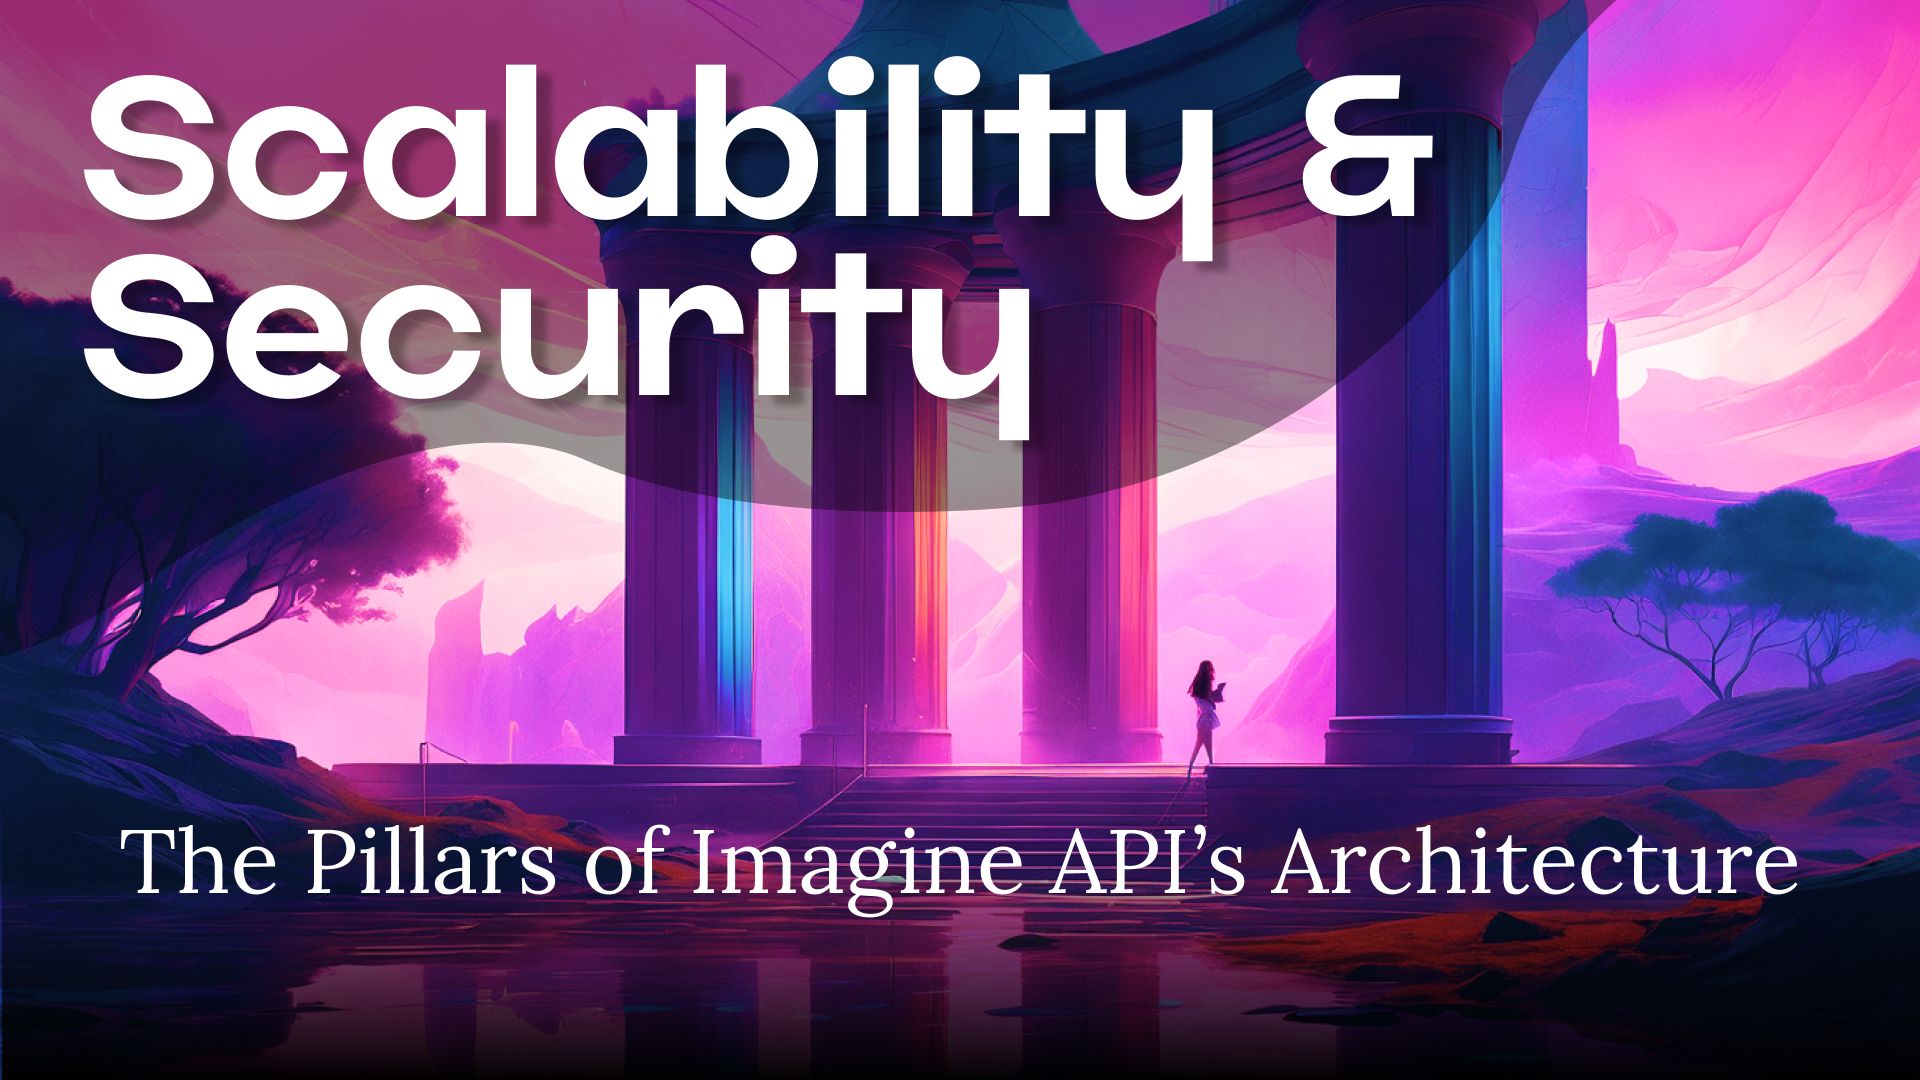 Scalability and Security: The Pillars of Imagine API's Architecture